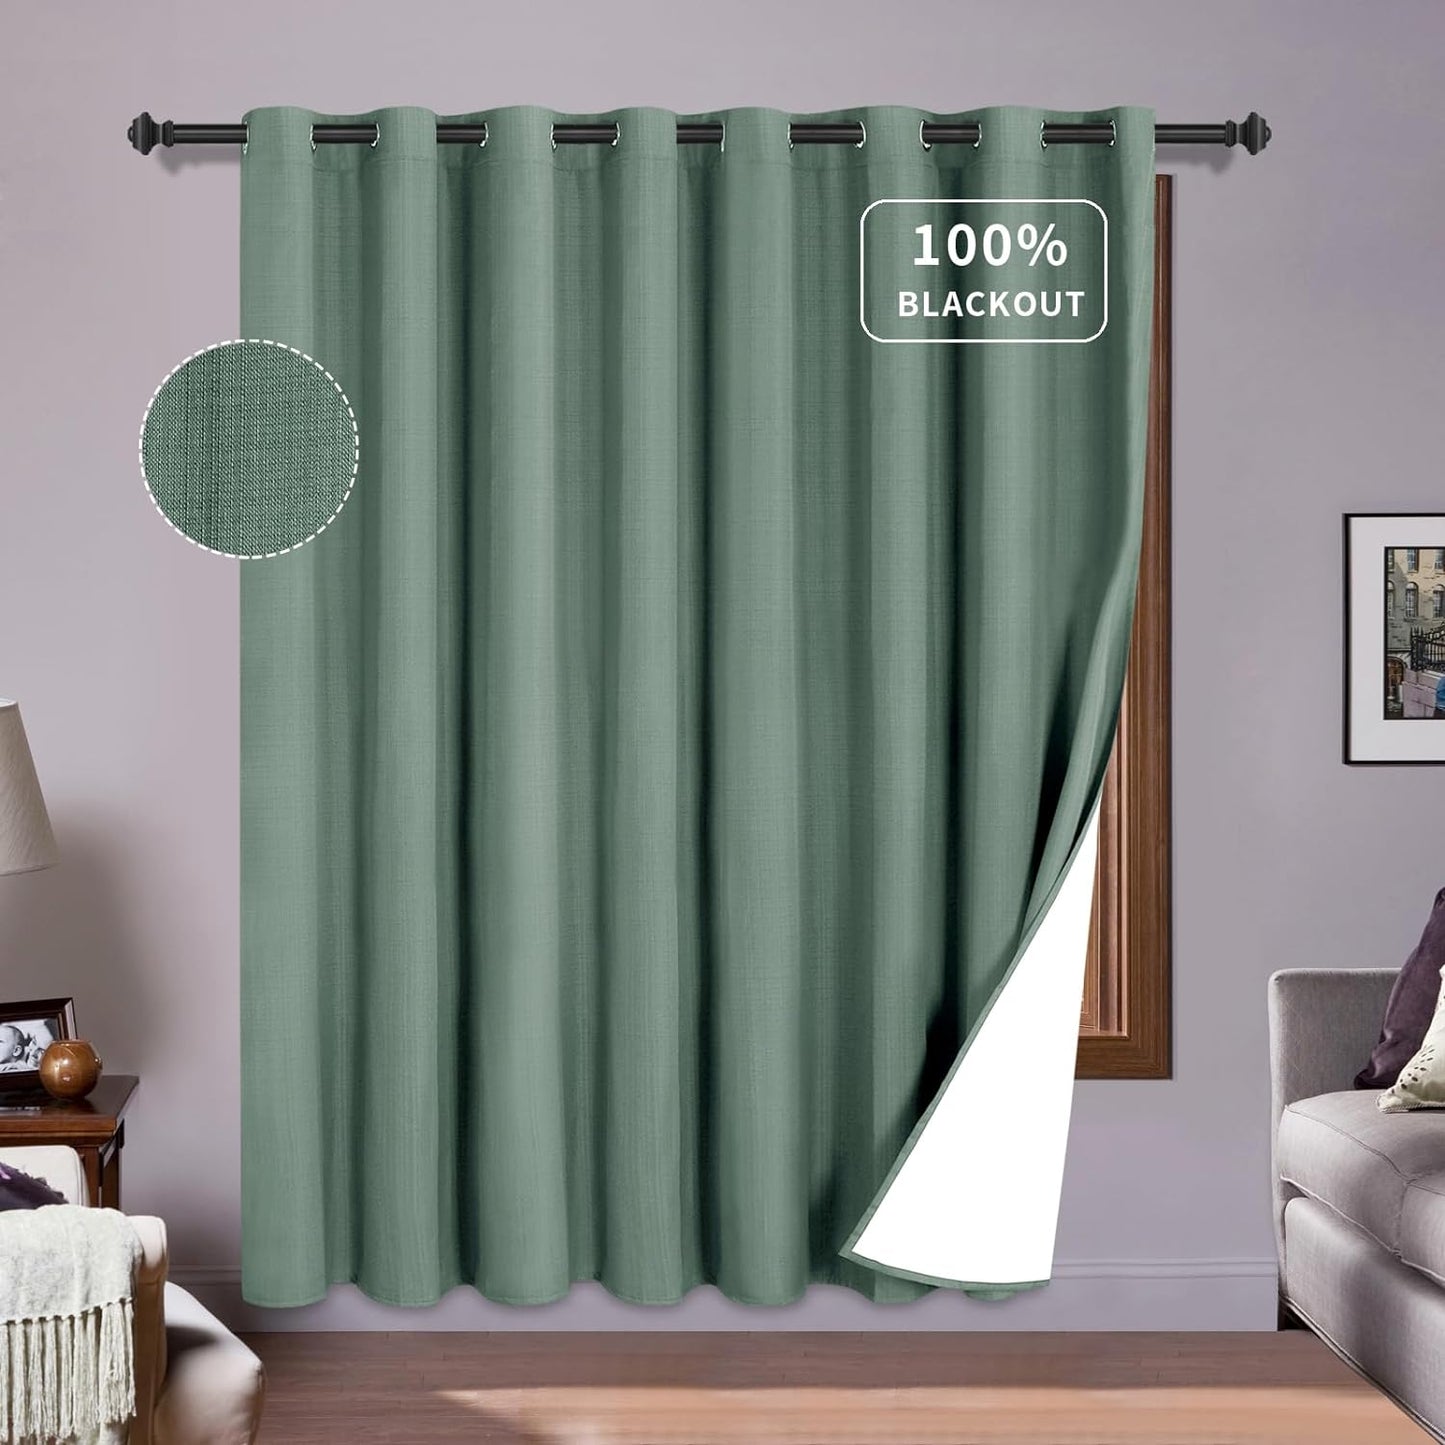 Purefit White Linen Blackout Curtains 84 Inches Long 100% Room Darkening Thermal Insulated Window Curtain Drapes for Bedroom Living Room Nursery with Anti-Rust Grommets & Energy Saving Liner, 2 Panels  PureFit Sage Green 100"W X 84"L 